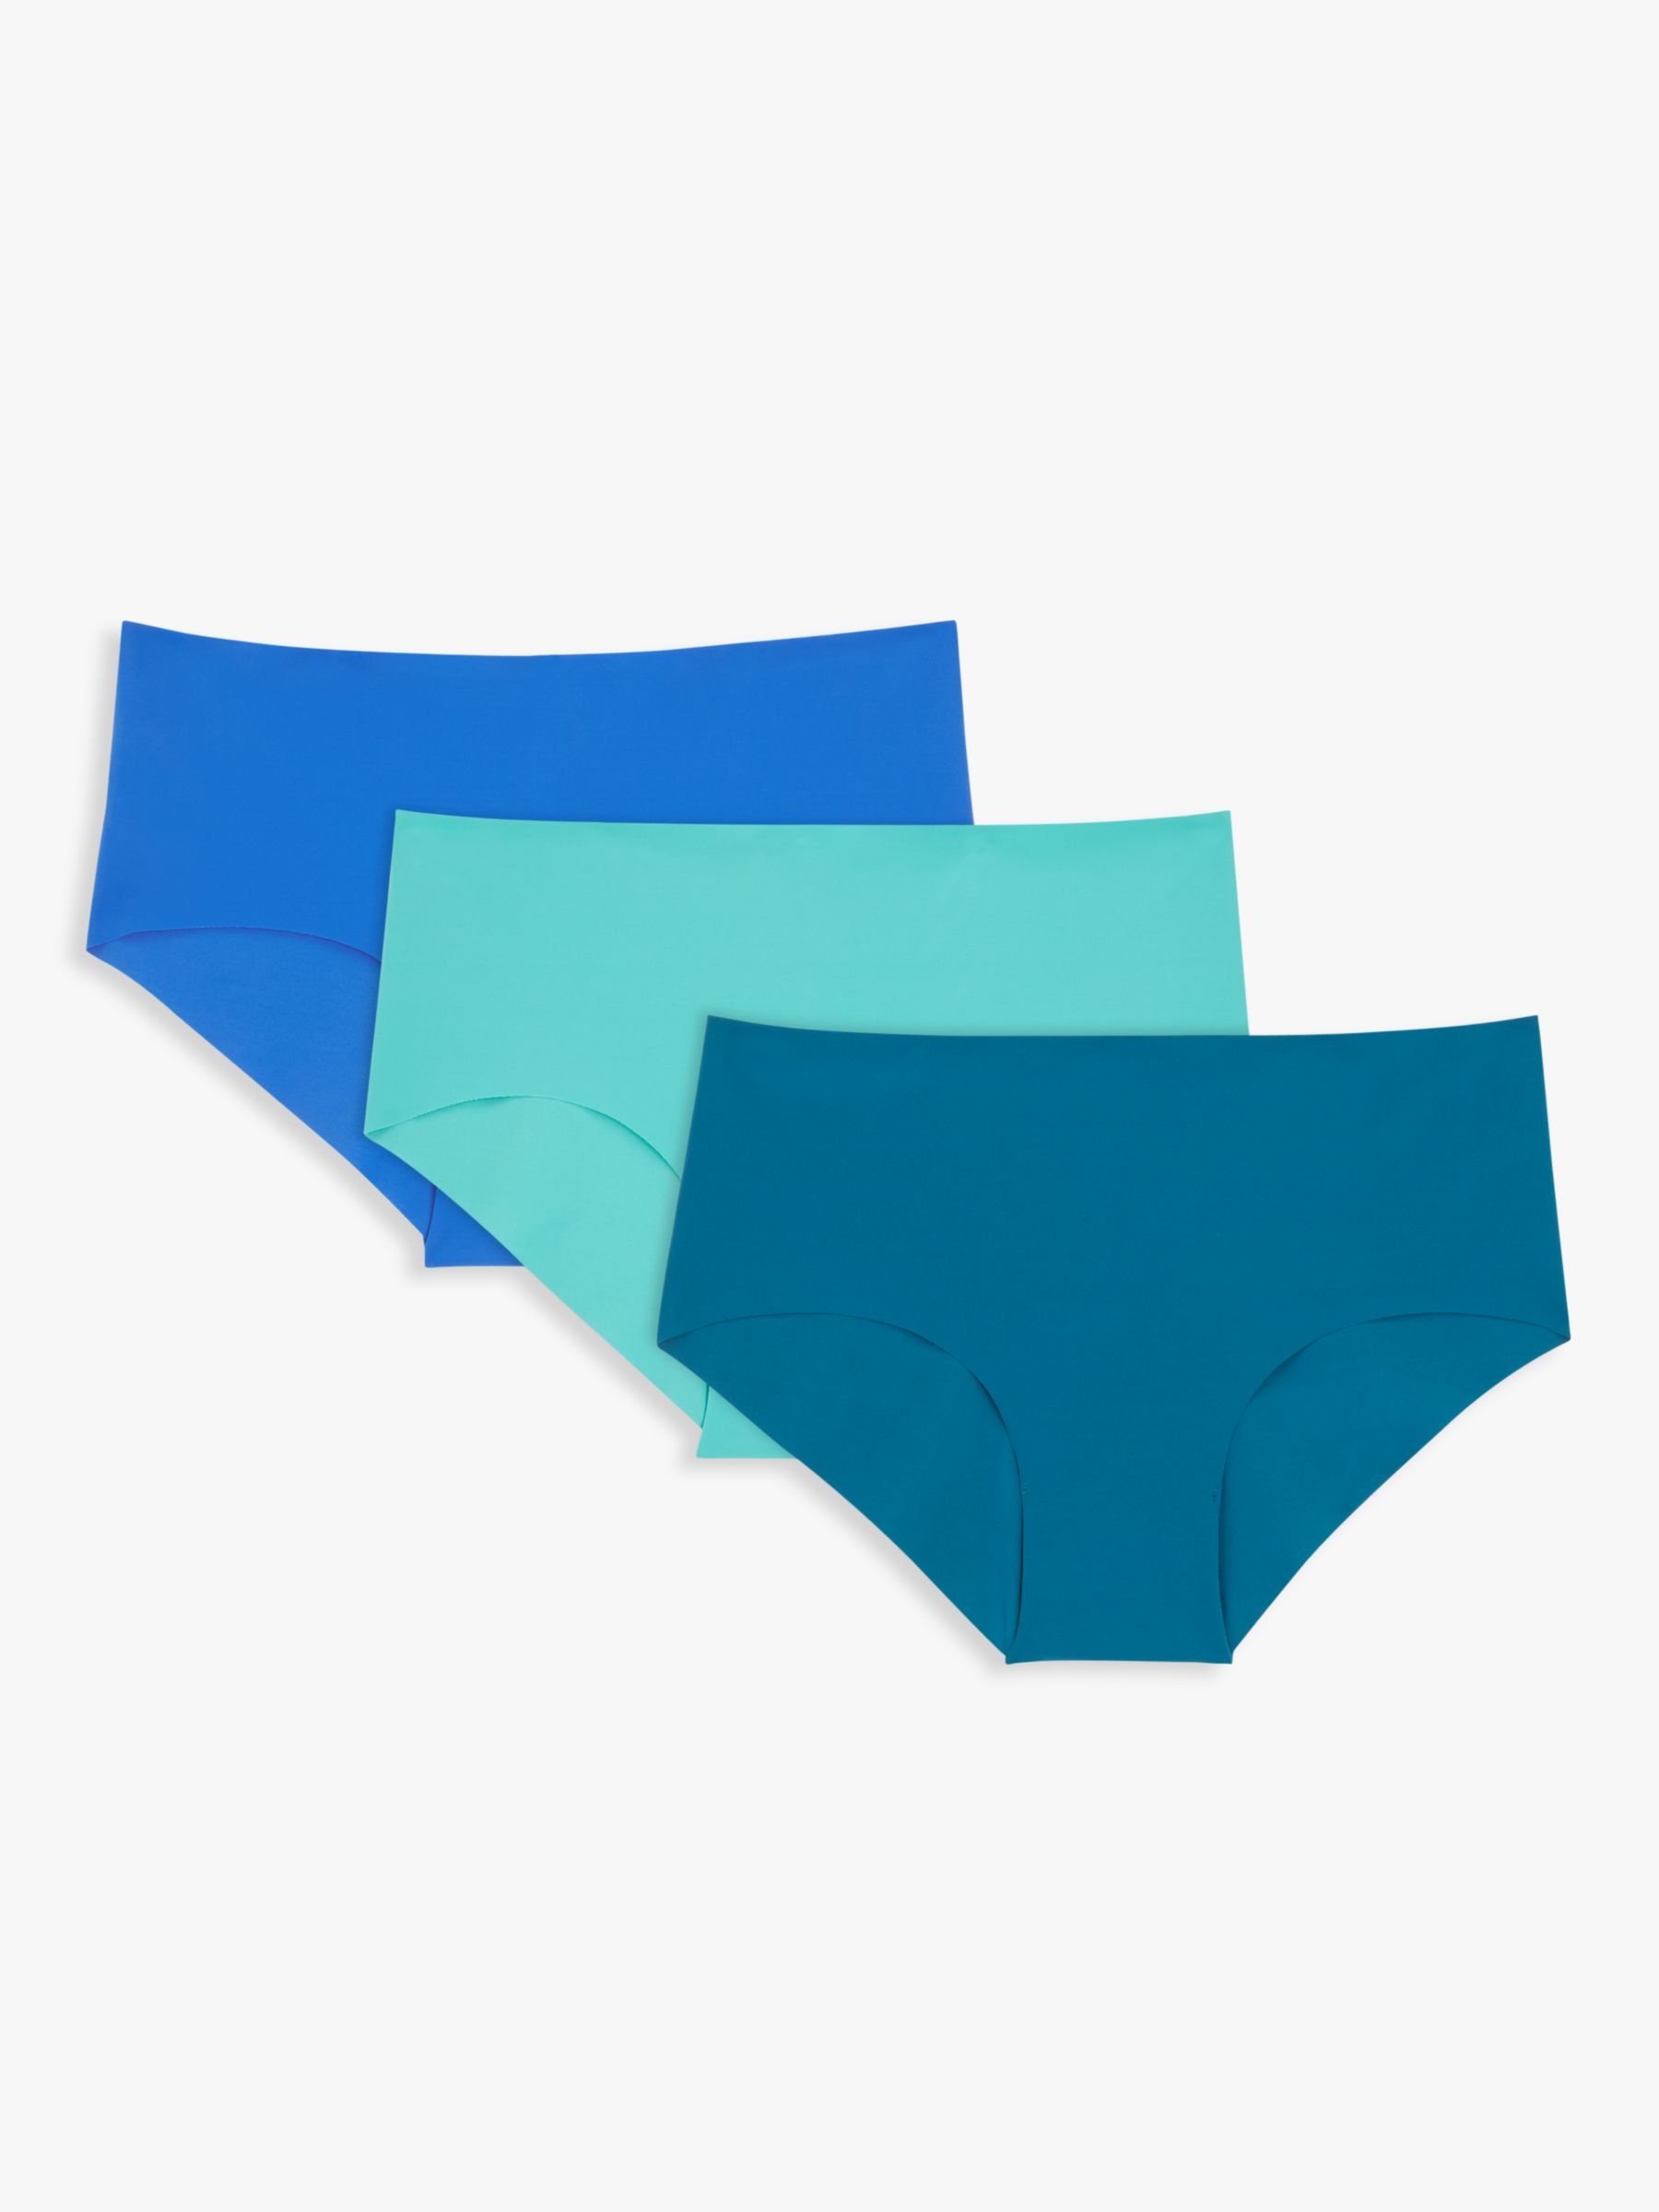 John Lewis ANYDAY No VPL Short Knickers, Pack of 3, Teal/Mint/Navy, 8